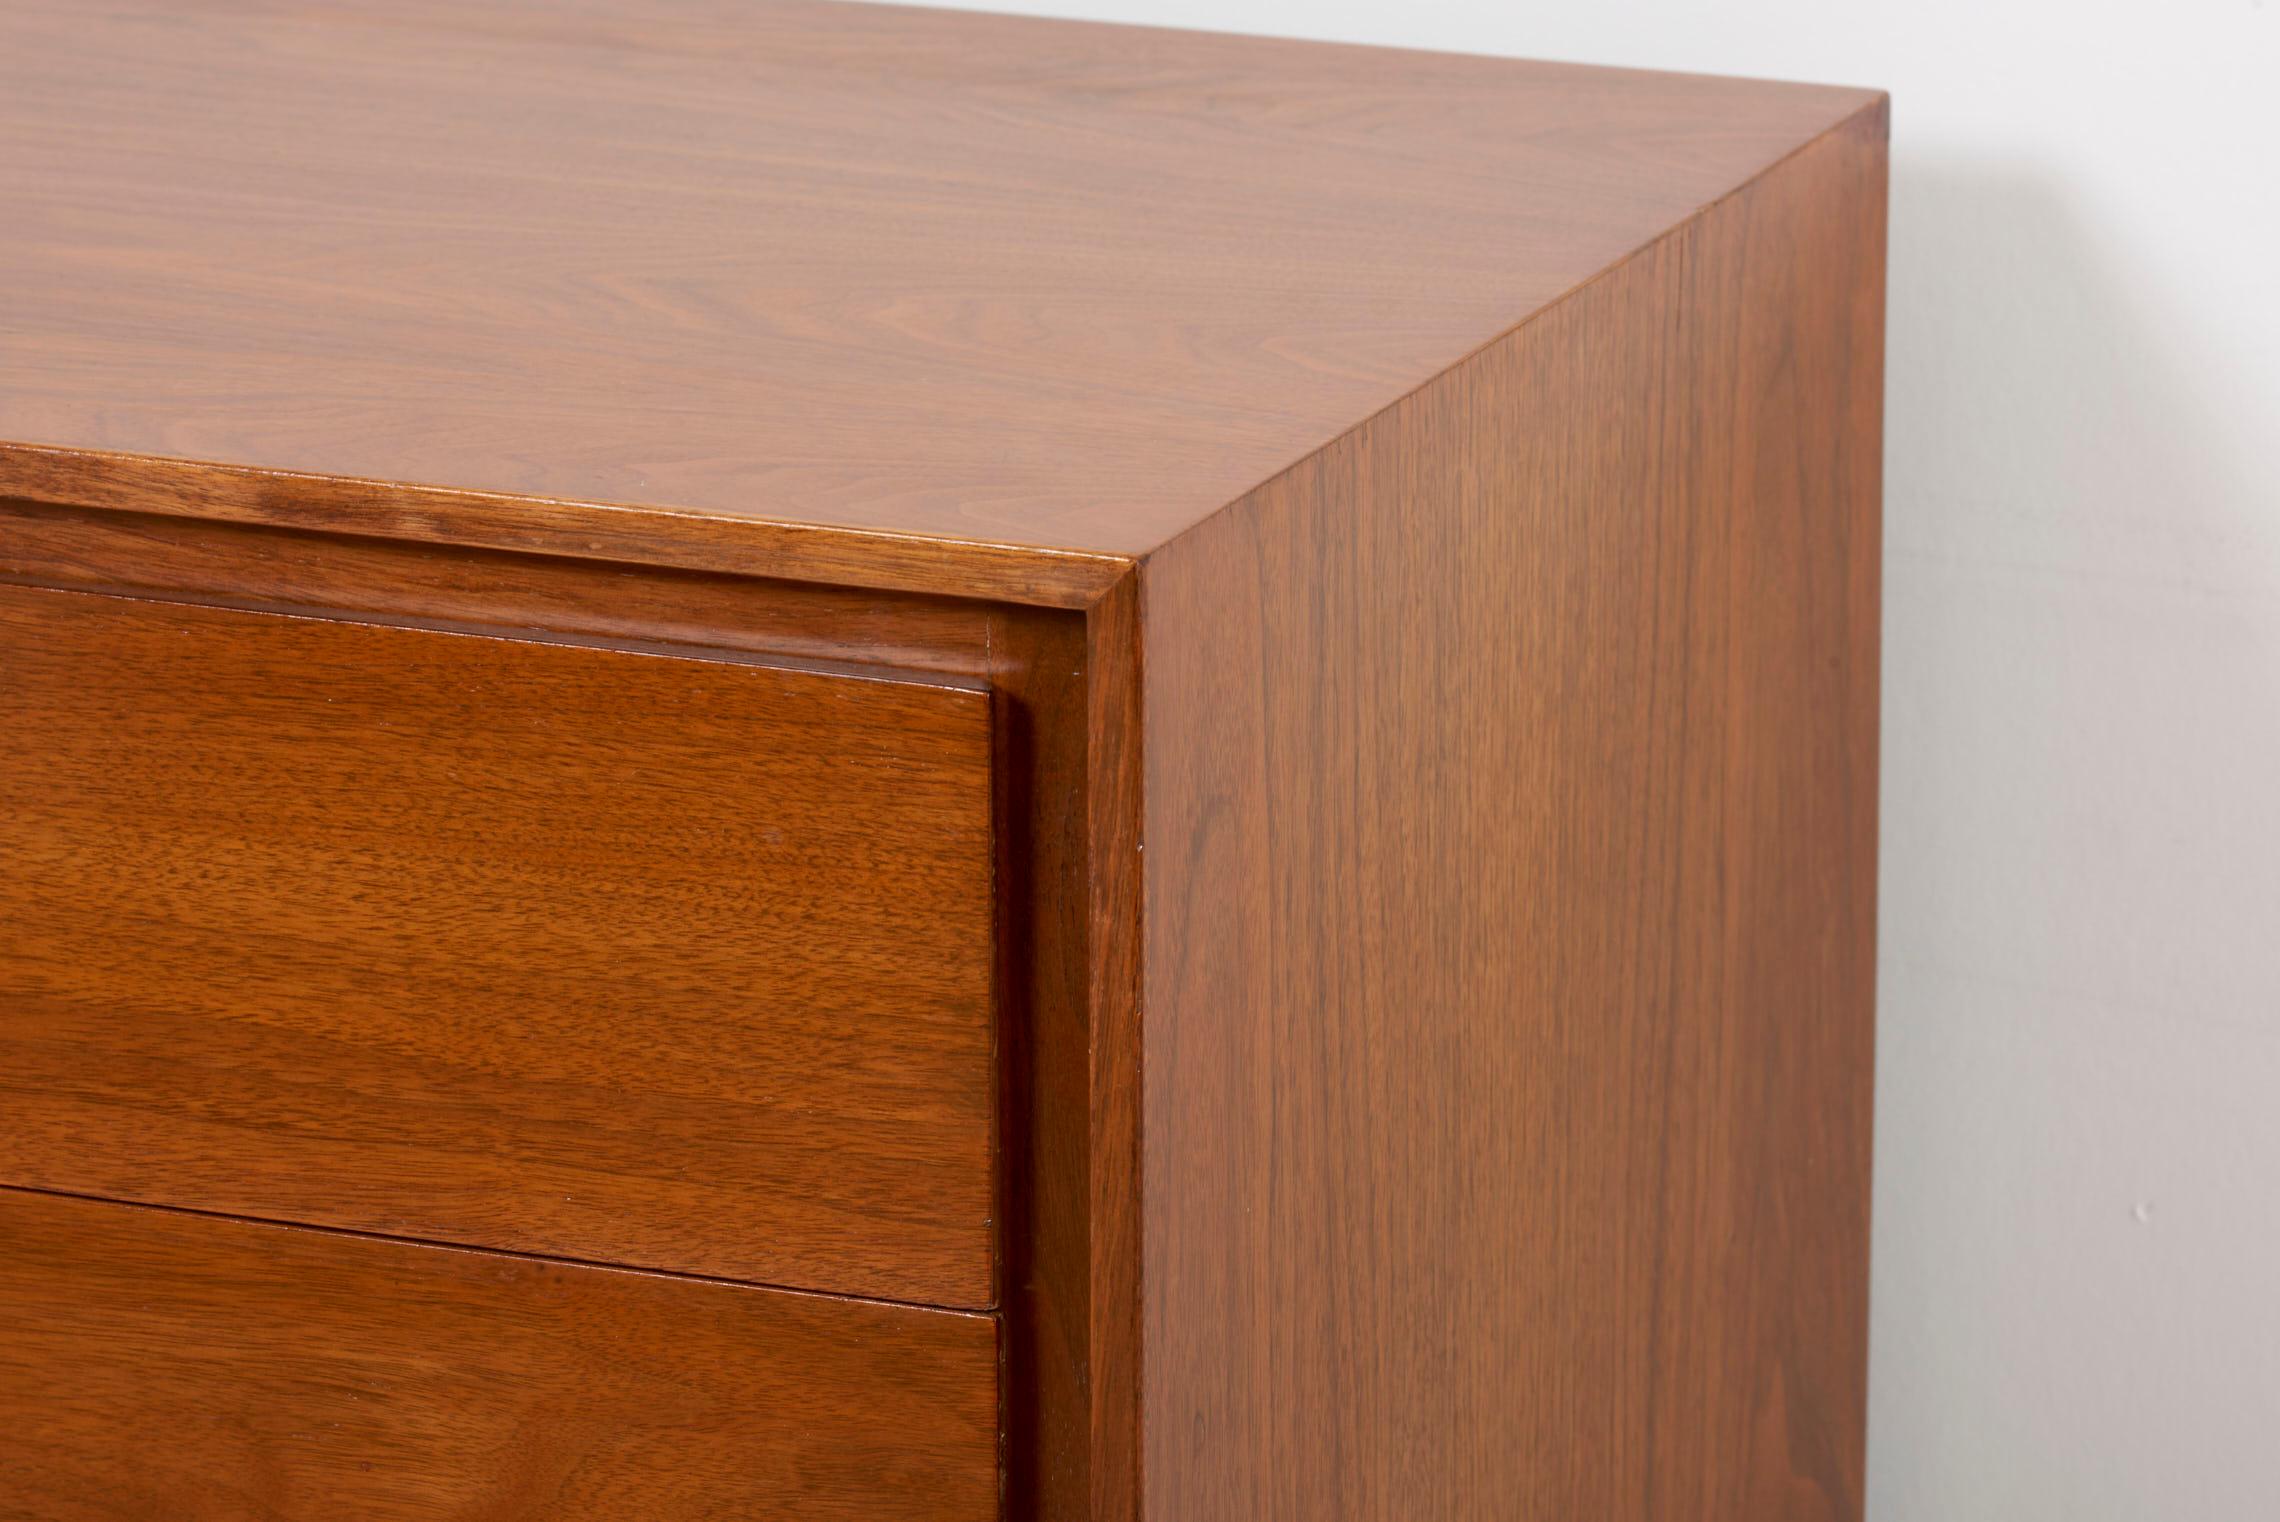 Modernist Sideboard in Walnut by Allan Gould, USA 1960s For Sale 4